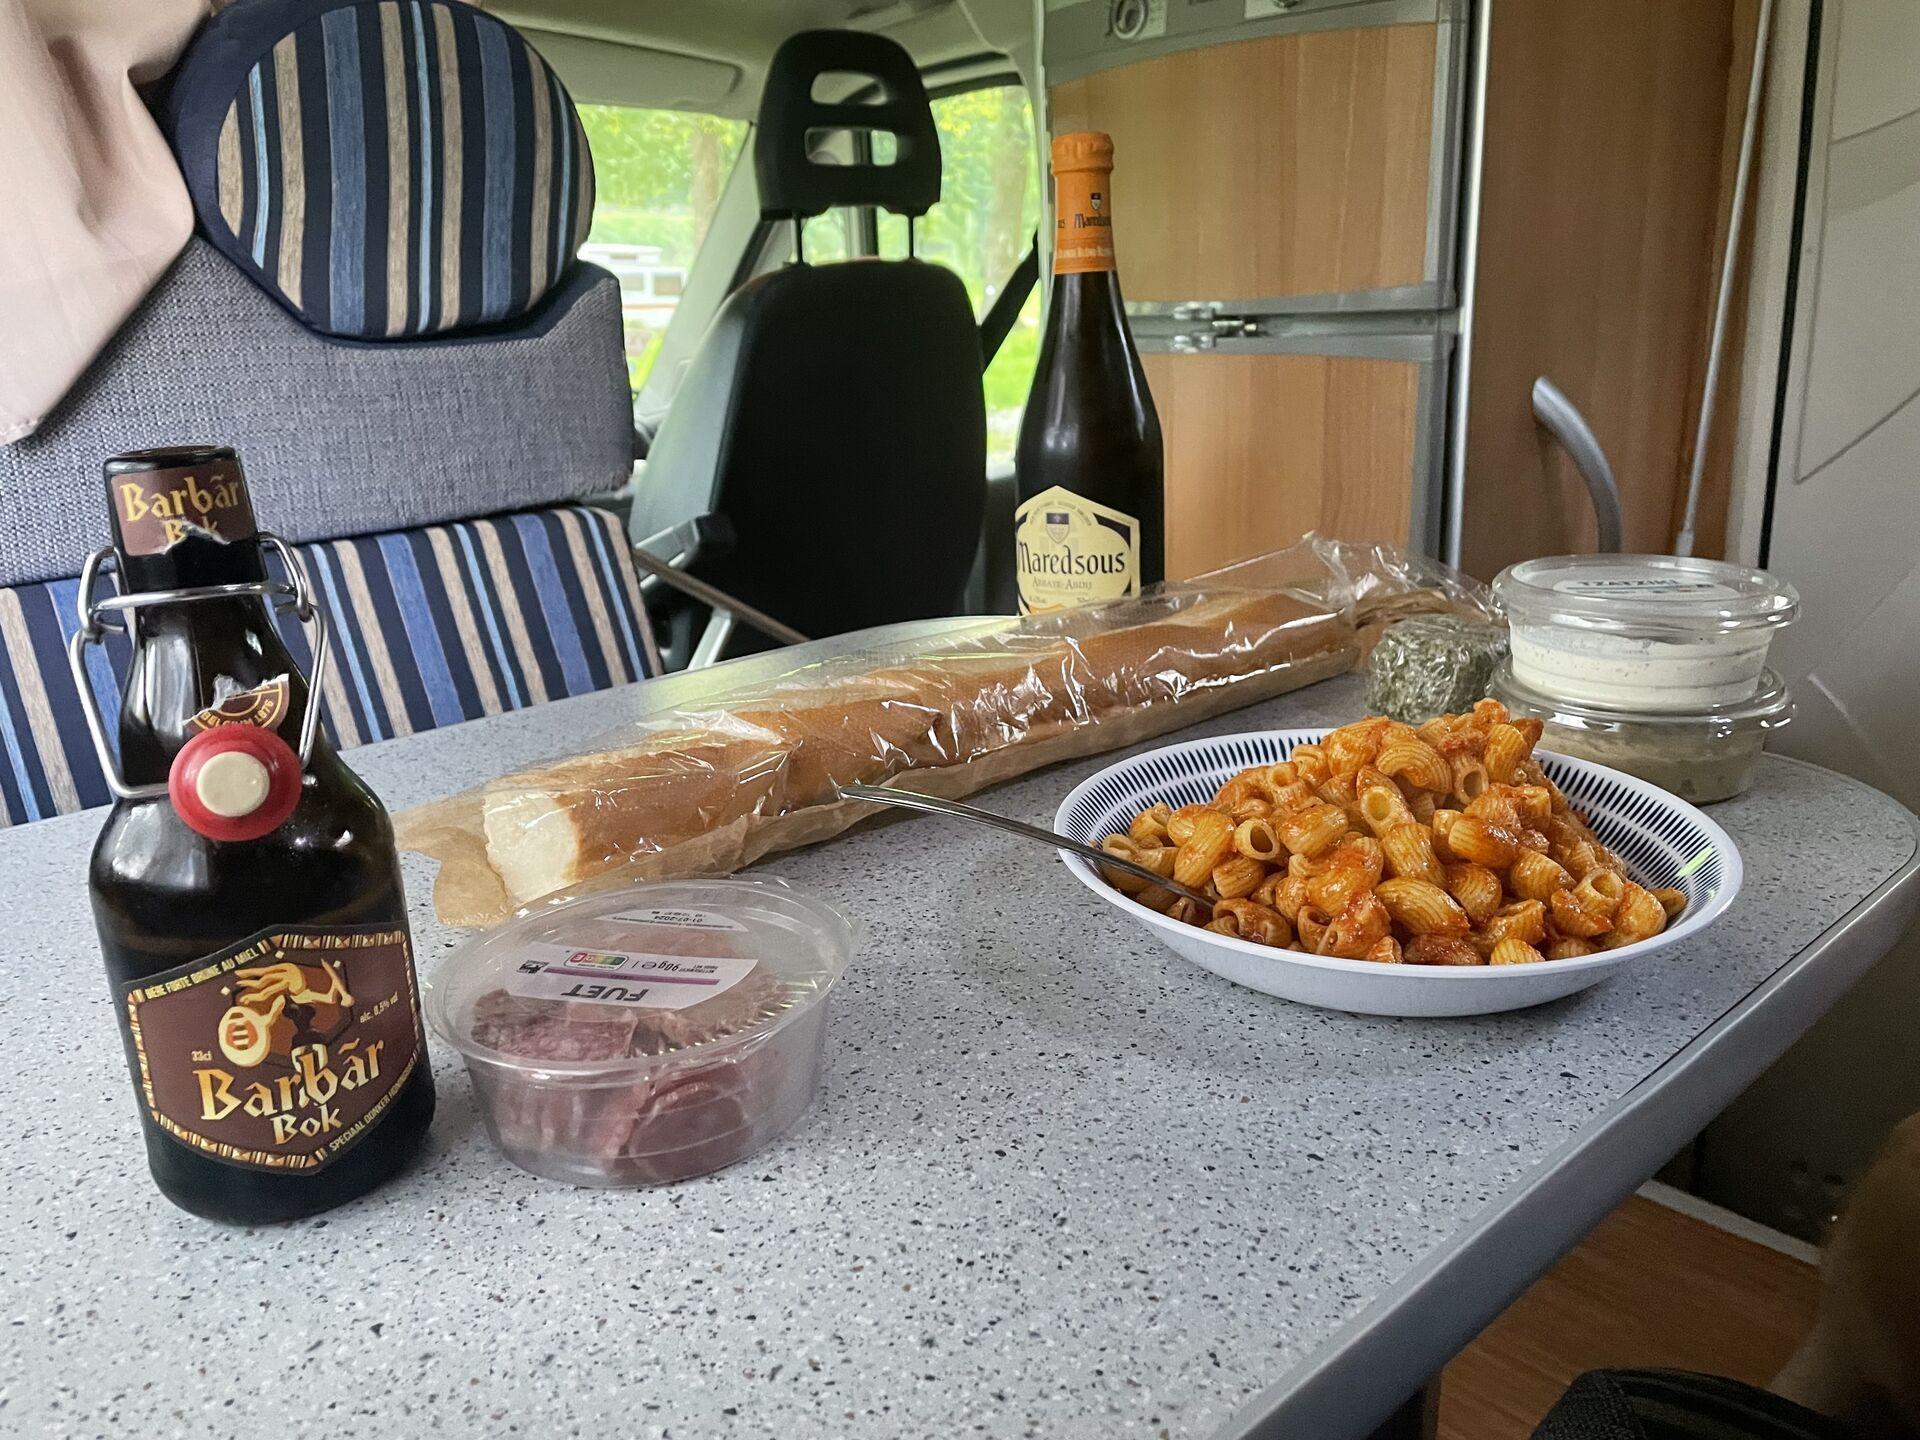 Pasta, salami, bread, cheese, dips, and beer on the table of a campervan